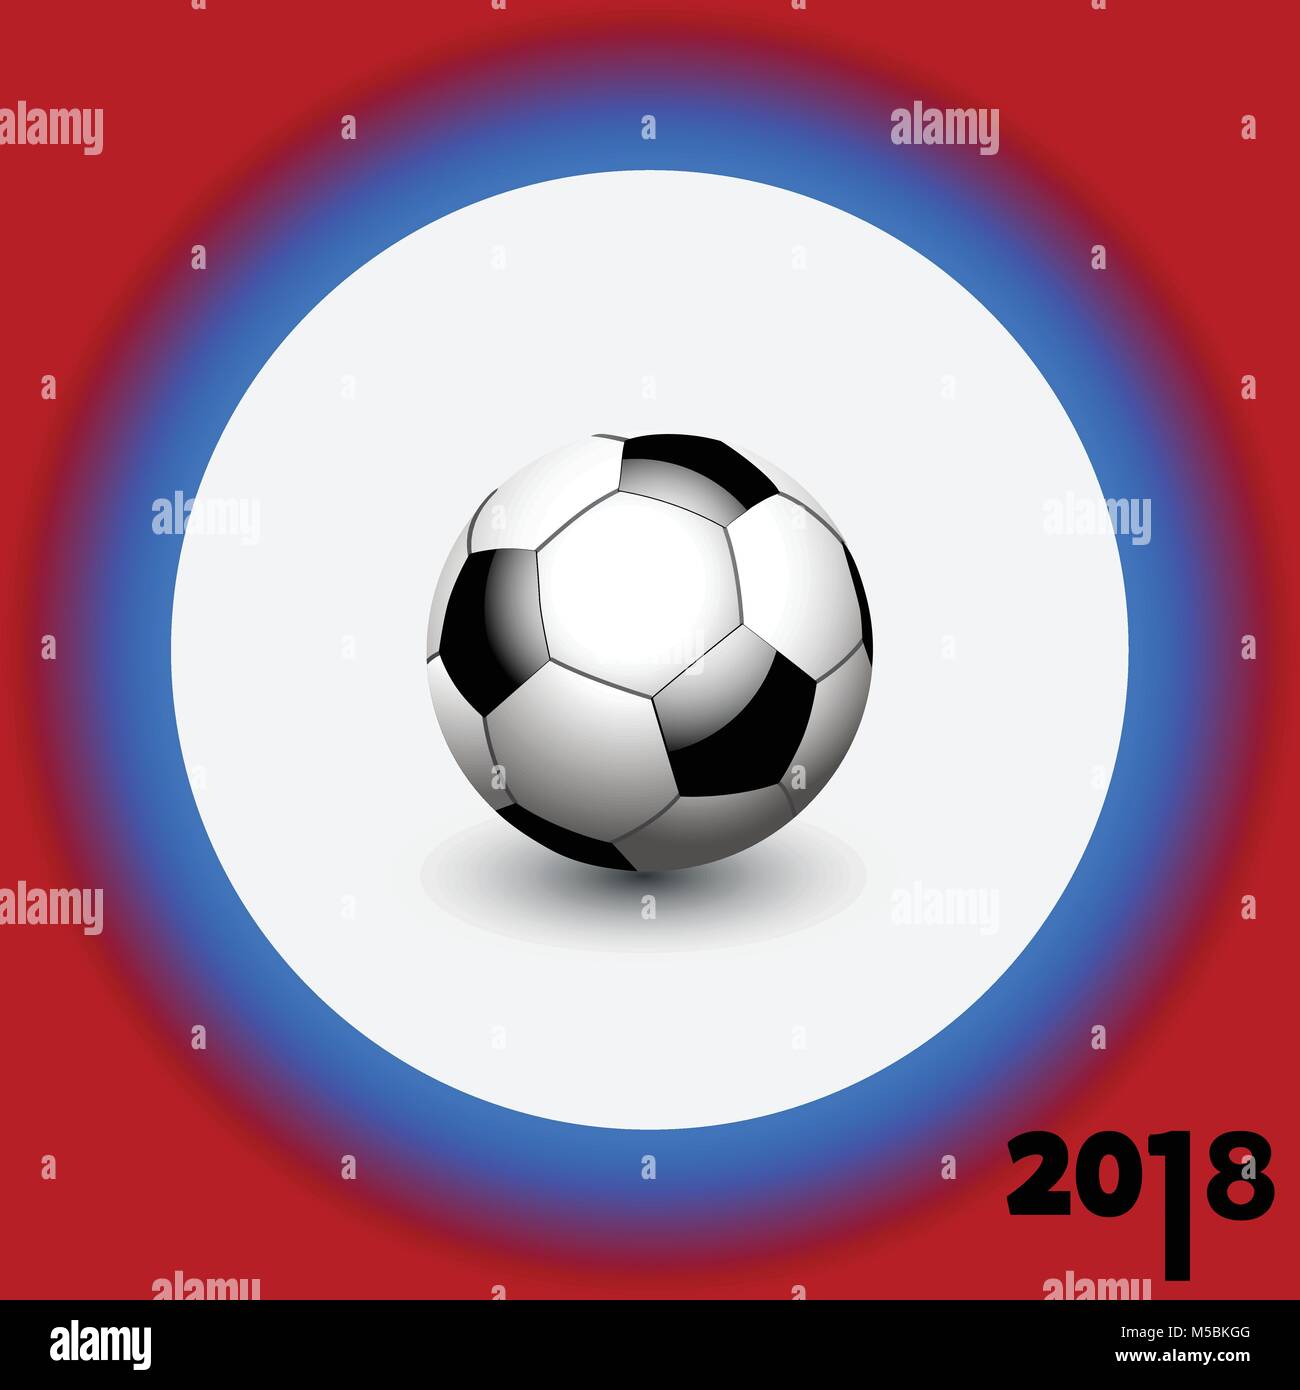 3D Illustration of Soccer Football Over White Border on Blue and Red Background with Decorative 2018 Stock Vector